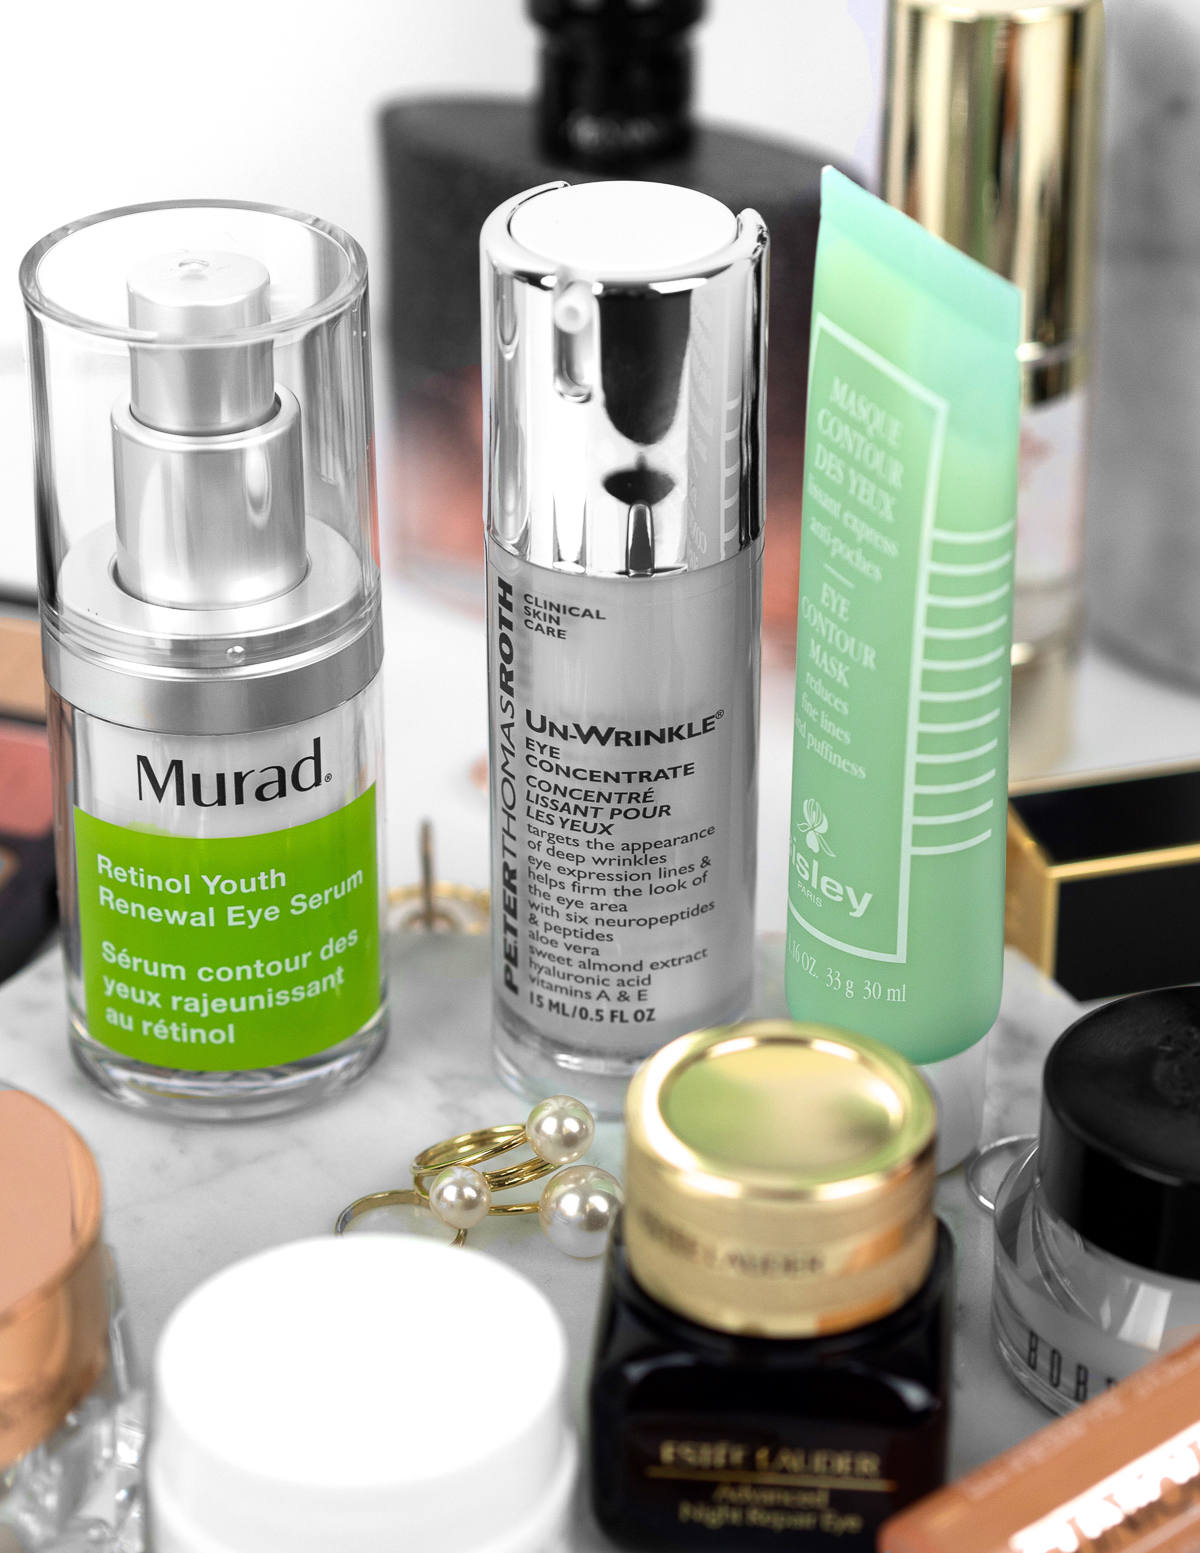 Best Eye Creams to Combat Wrinkles, Puffiness and Dark Circles